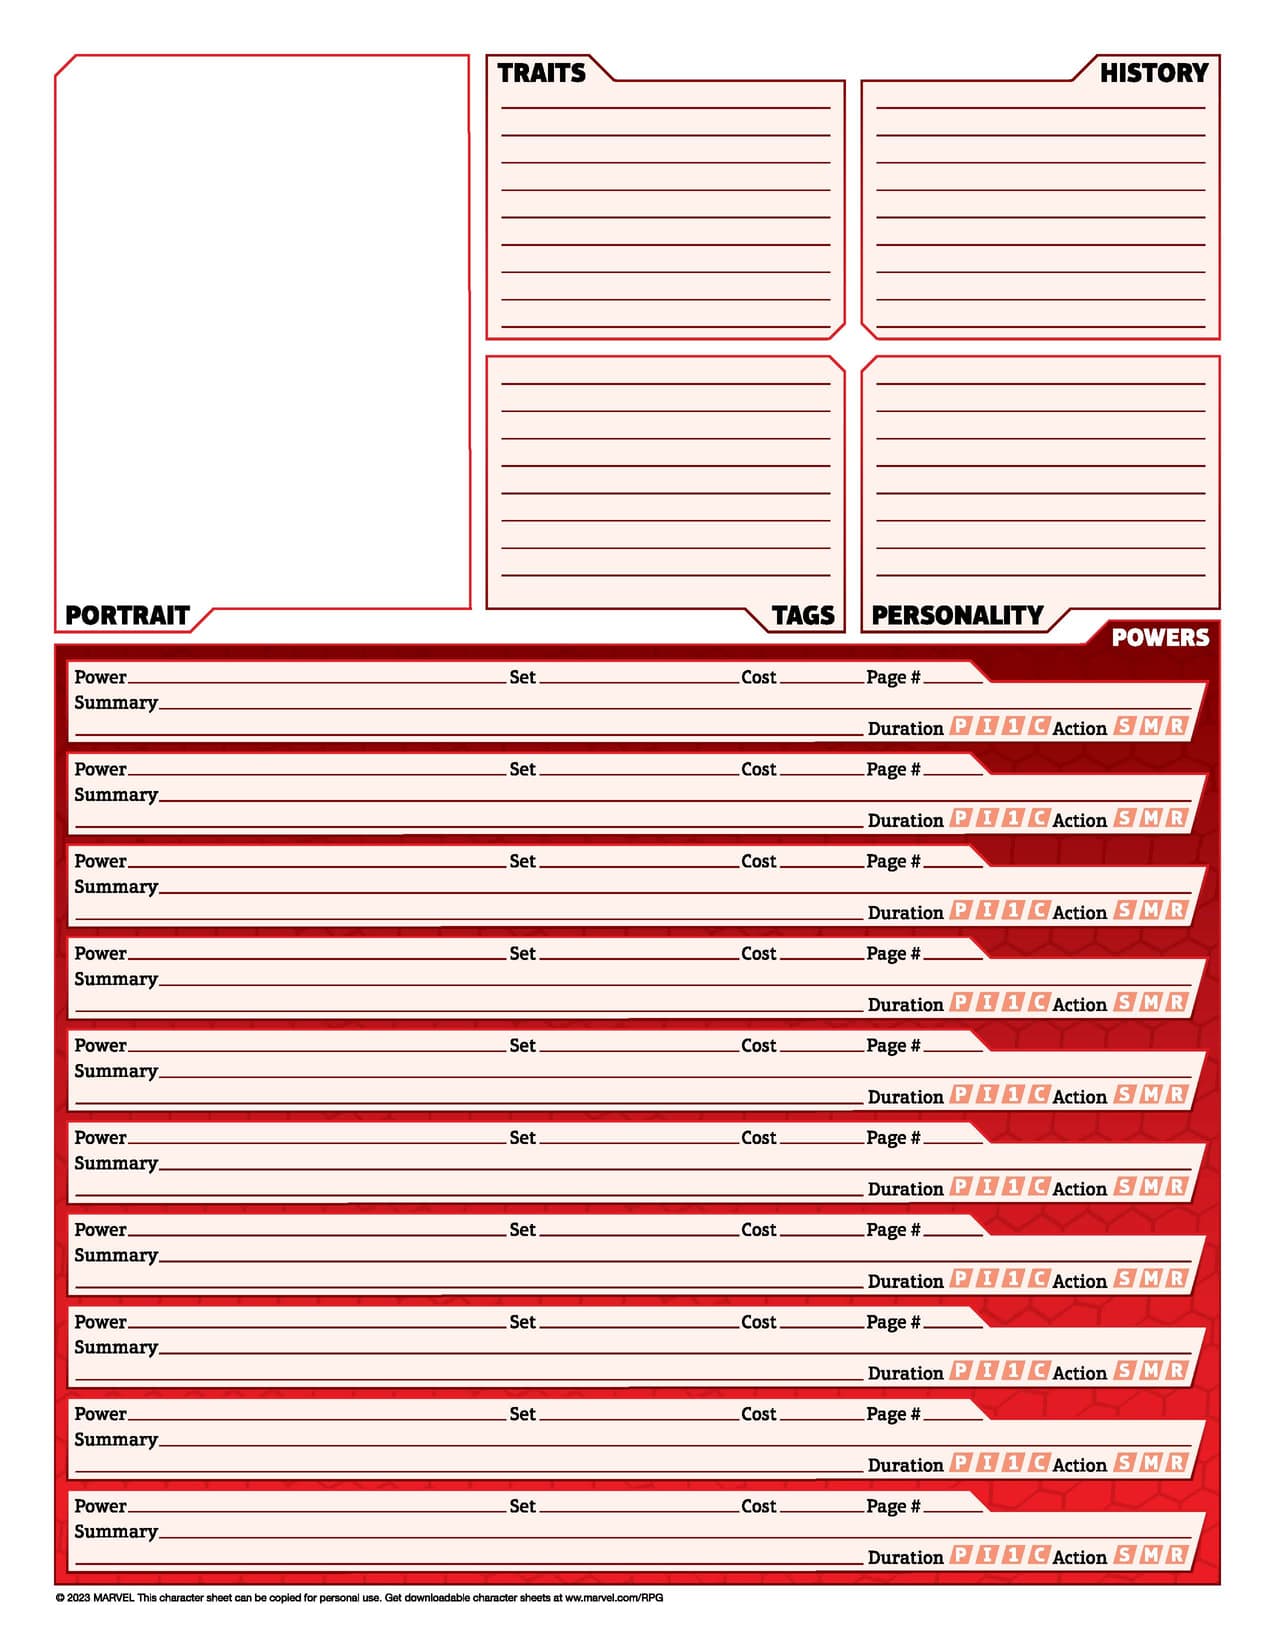 Marvel Multiverse Role-Playing Game Character Sheet #2